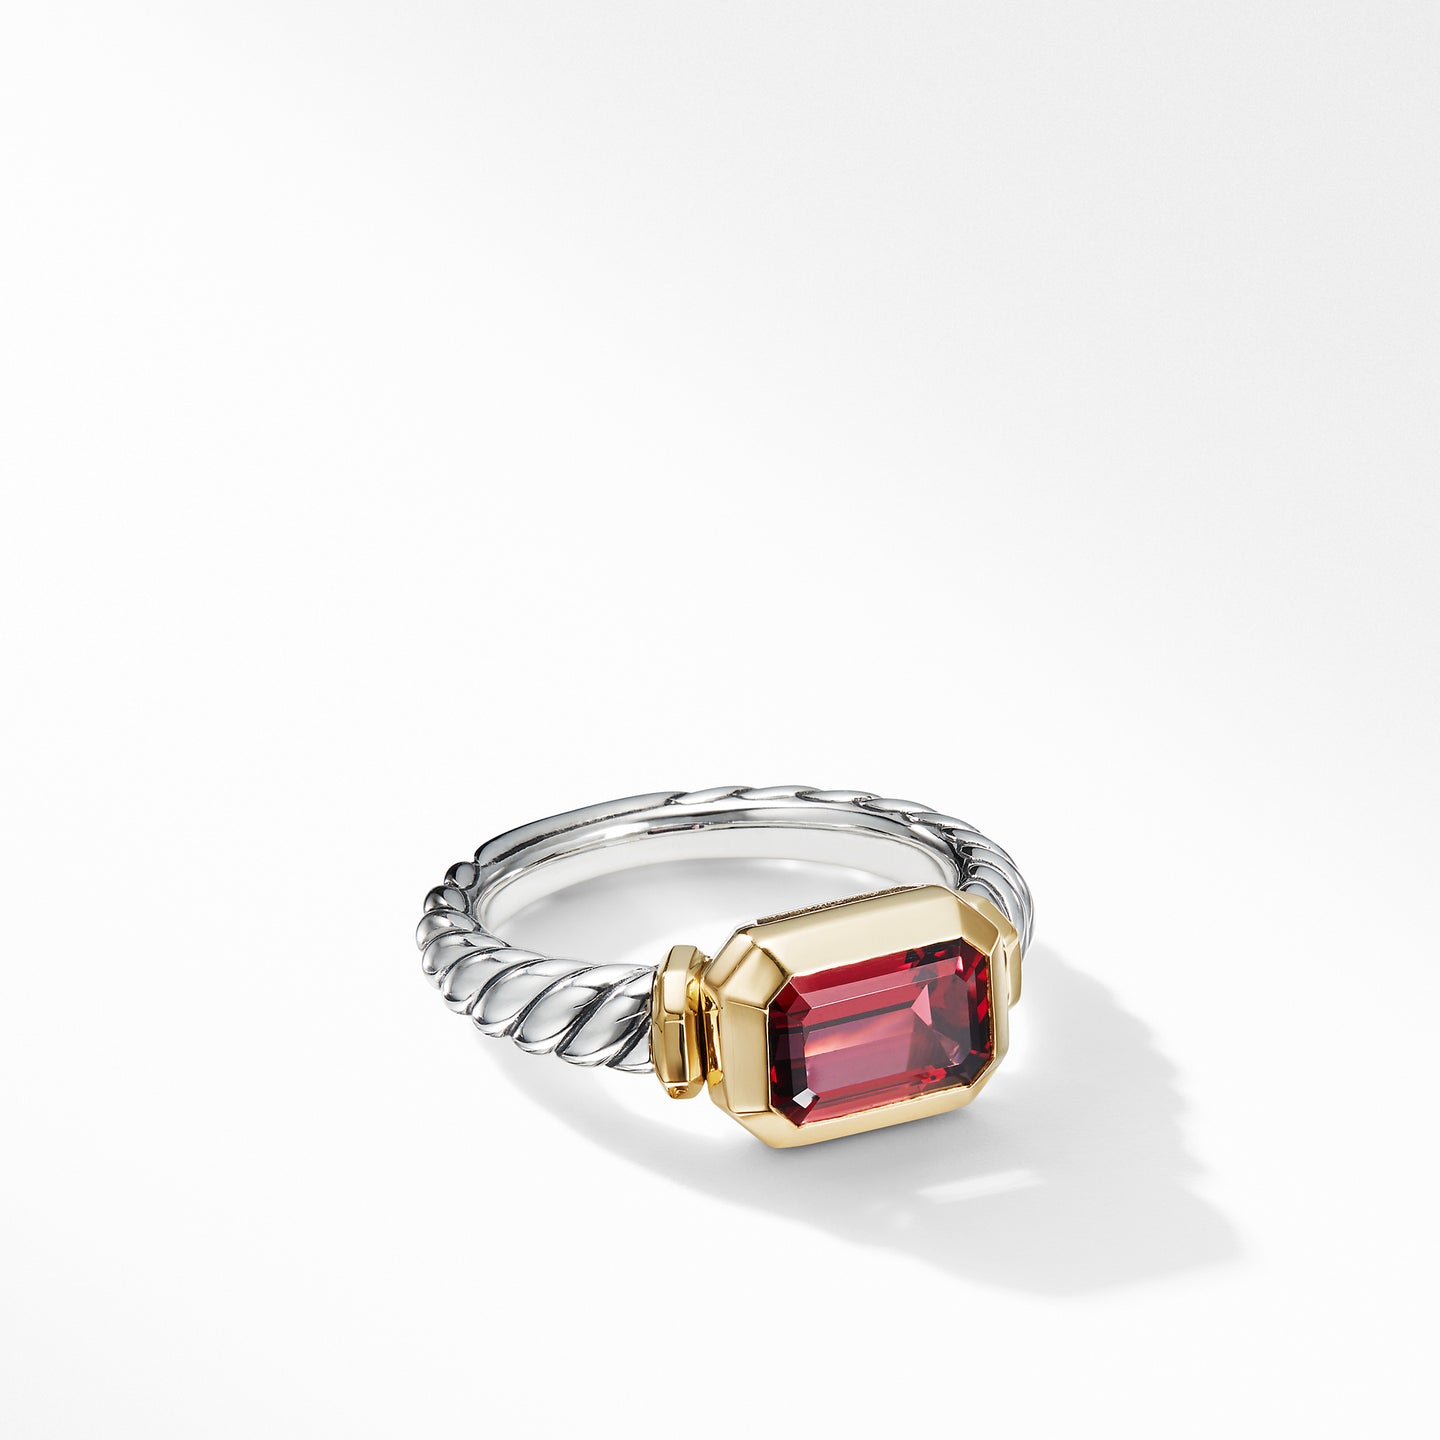 Novella Ring with Rhodolite Garnet and 18K Yellow Gold, Size 7